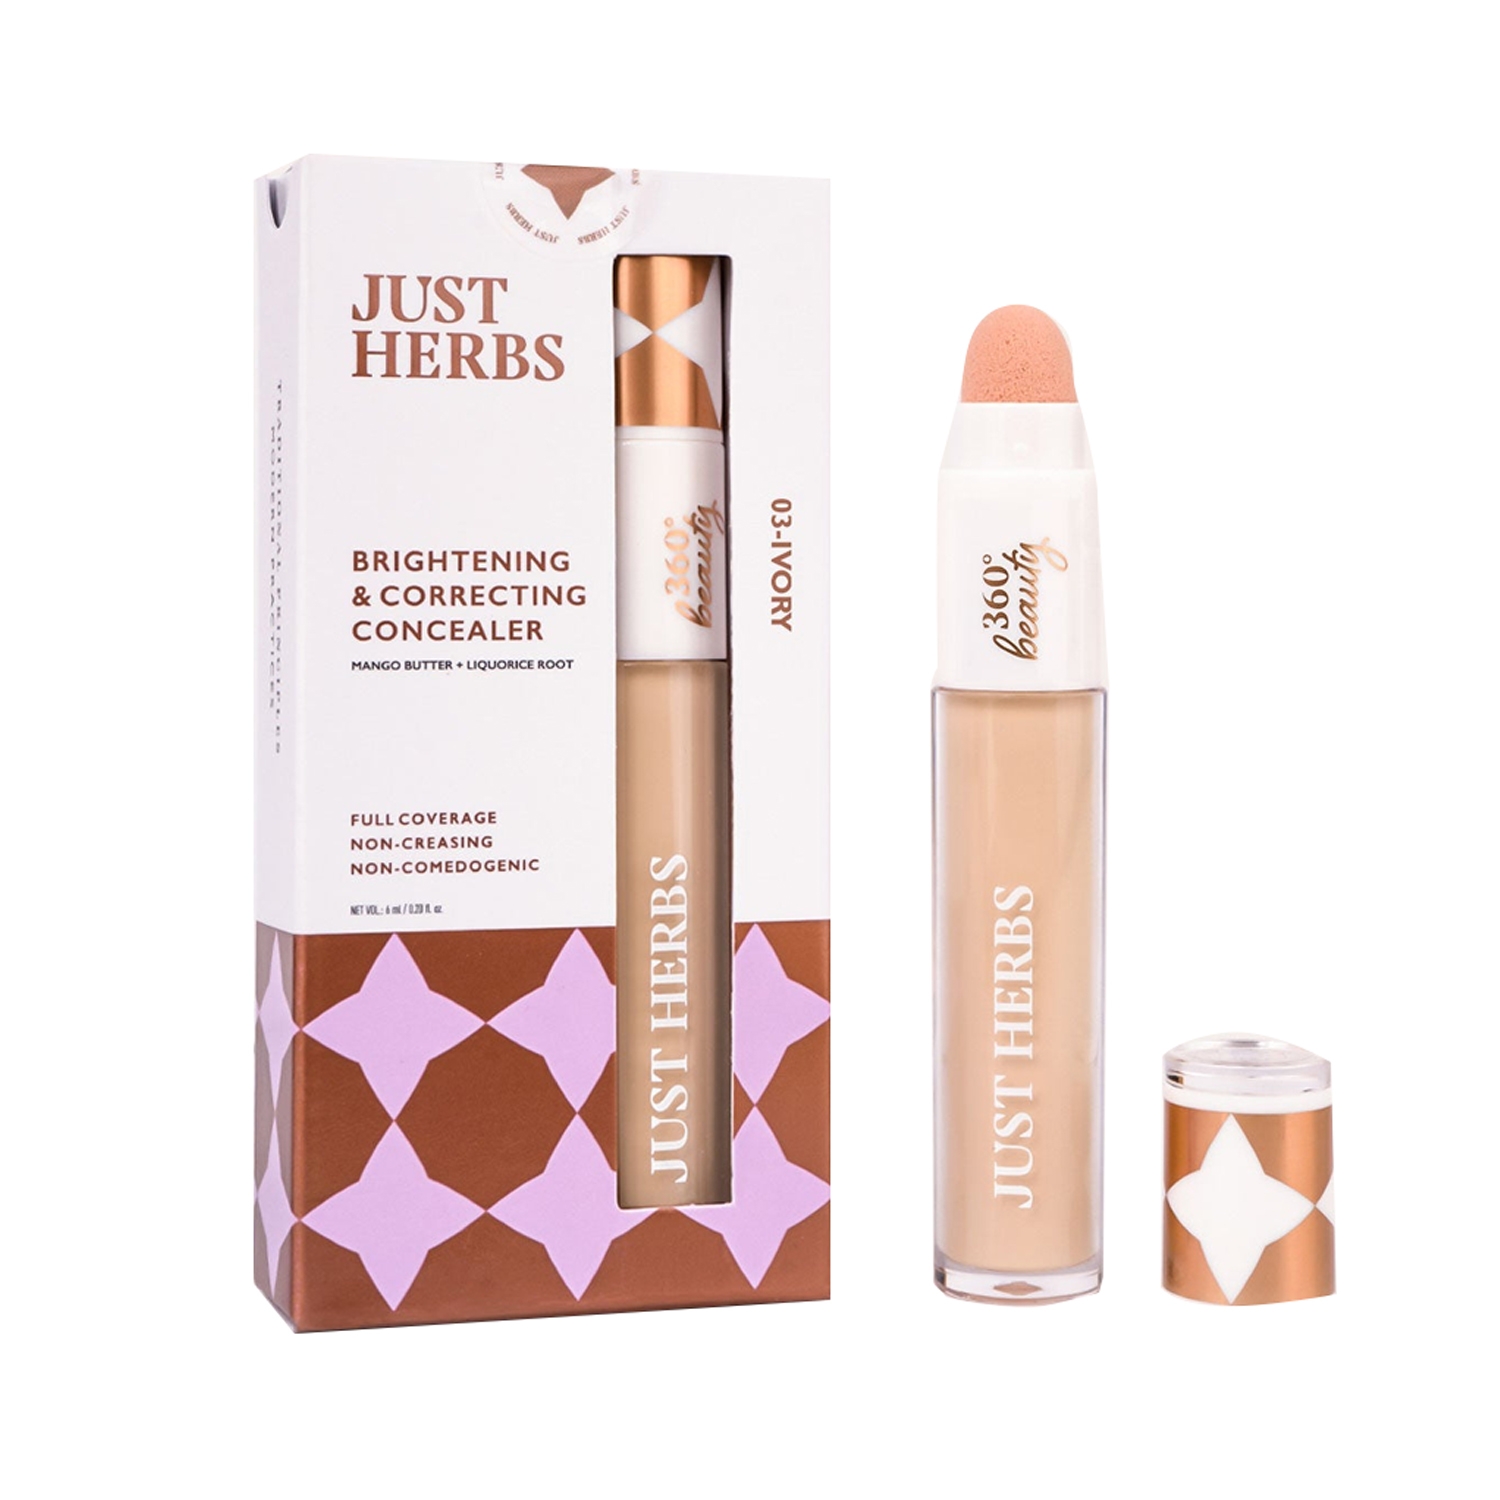 Just Herbs Brightening And Correcting Concealer - 03 Ivory (6ml)